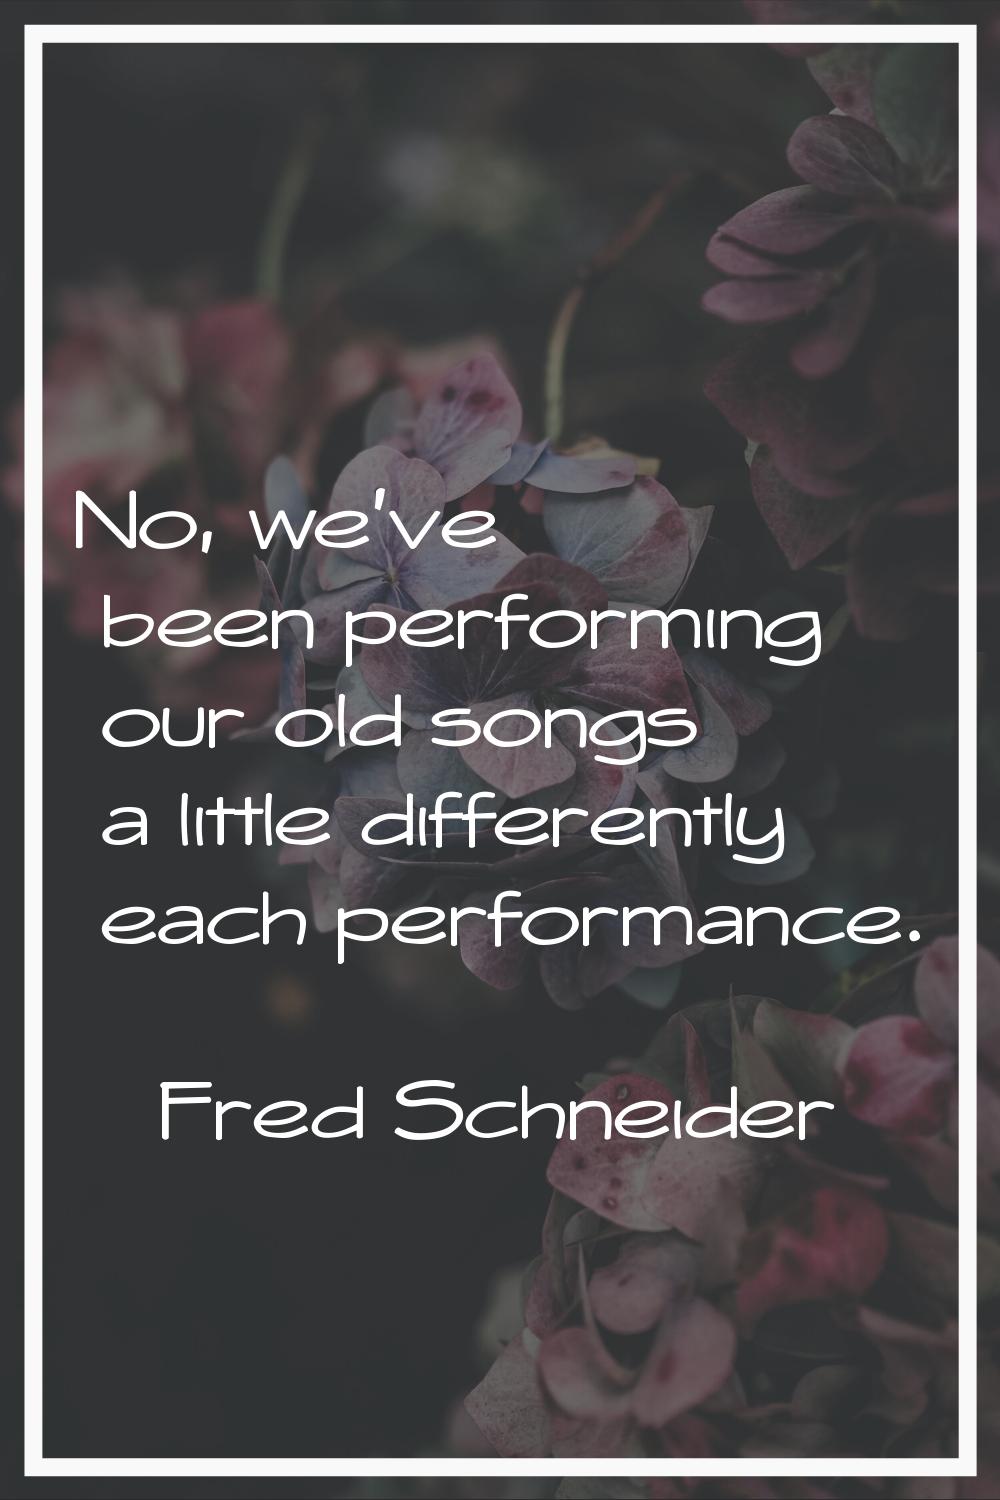 No, we've been performing our old songs a little differently each performance.